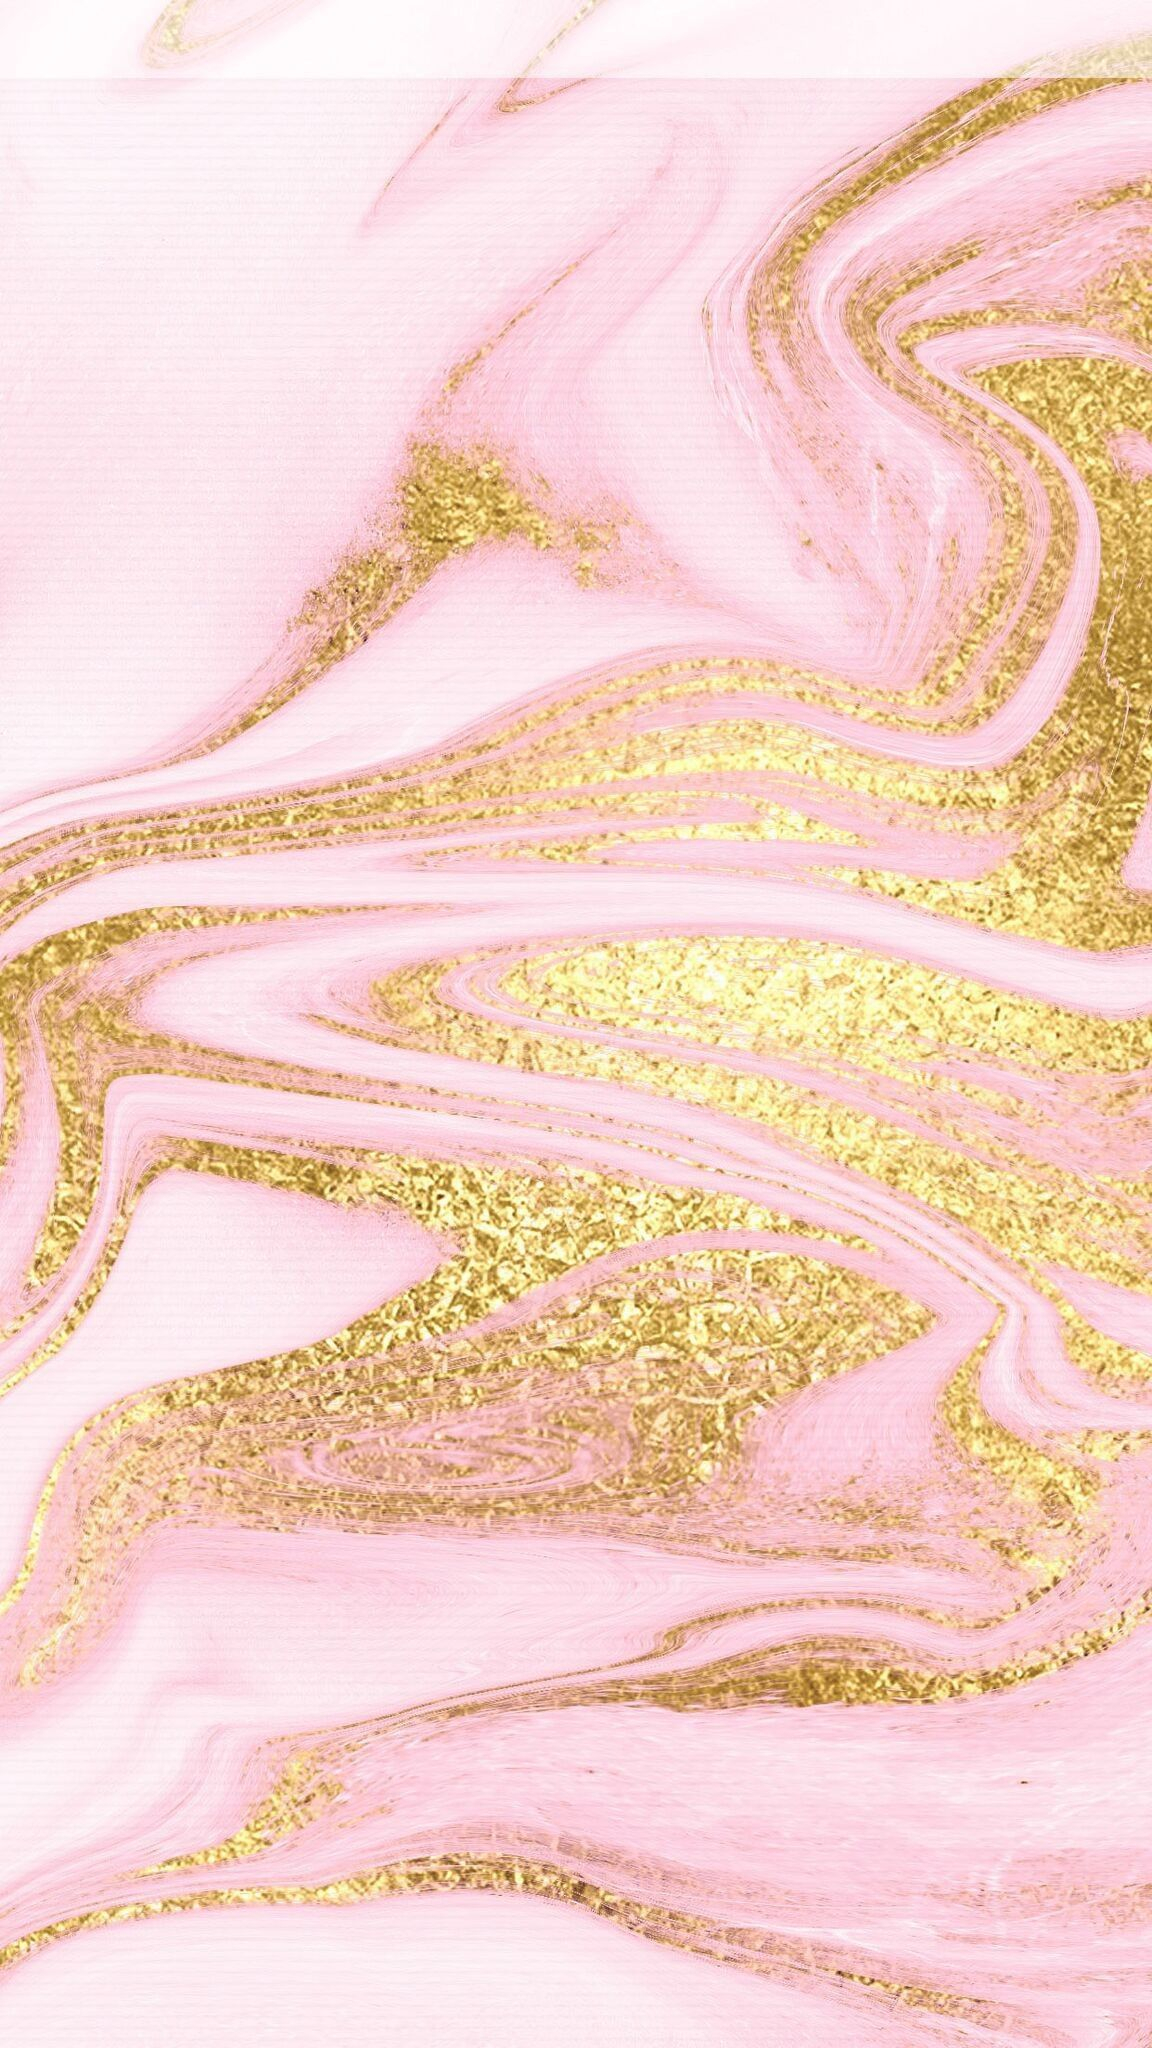 1152x2048 Pin by Anie on wallpapers | Gold girly wallpaper, Rose gold wallpaper, Iphone wallpaper glitter